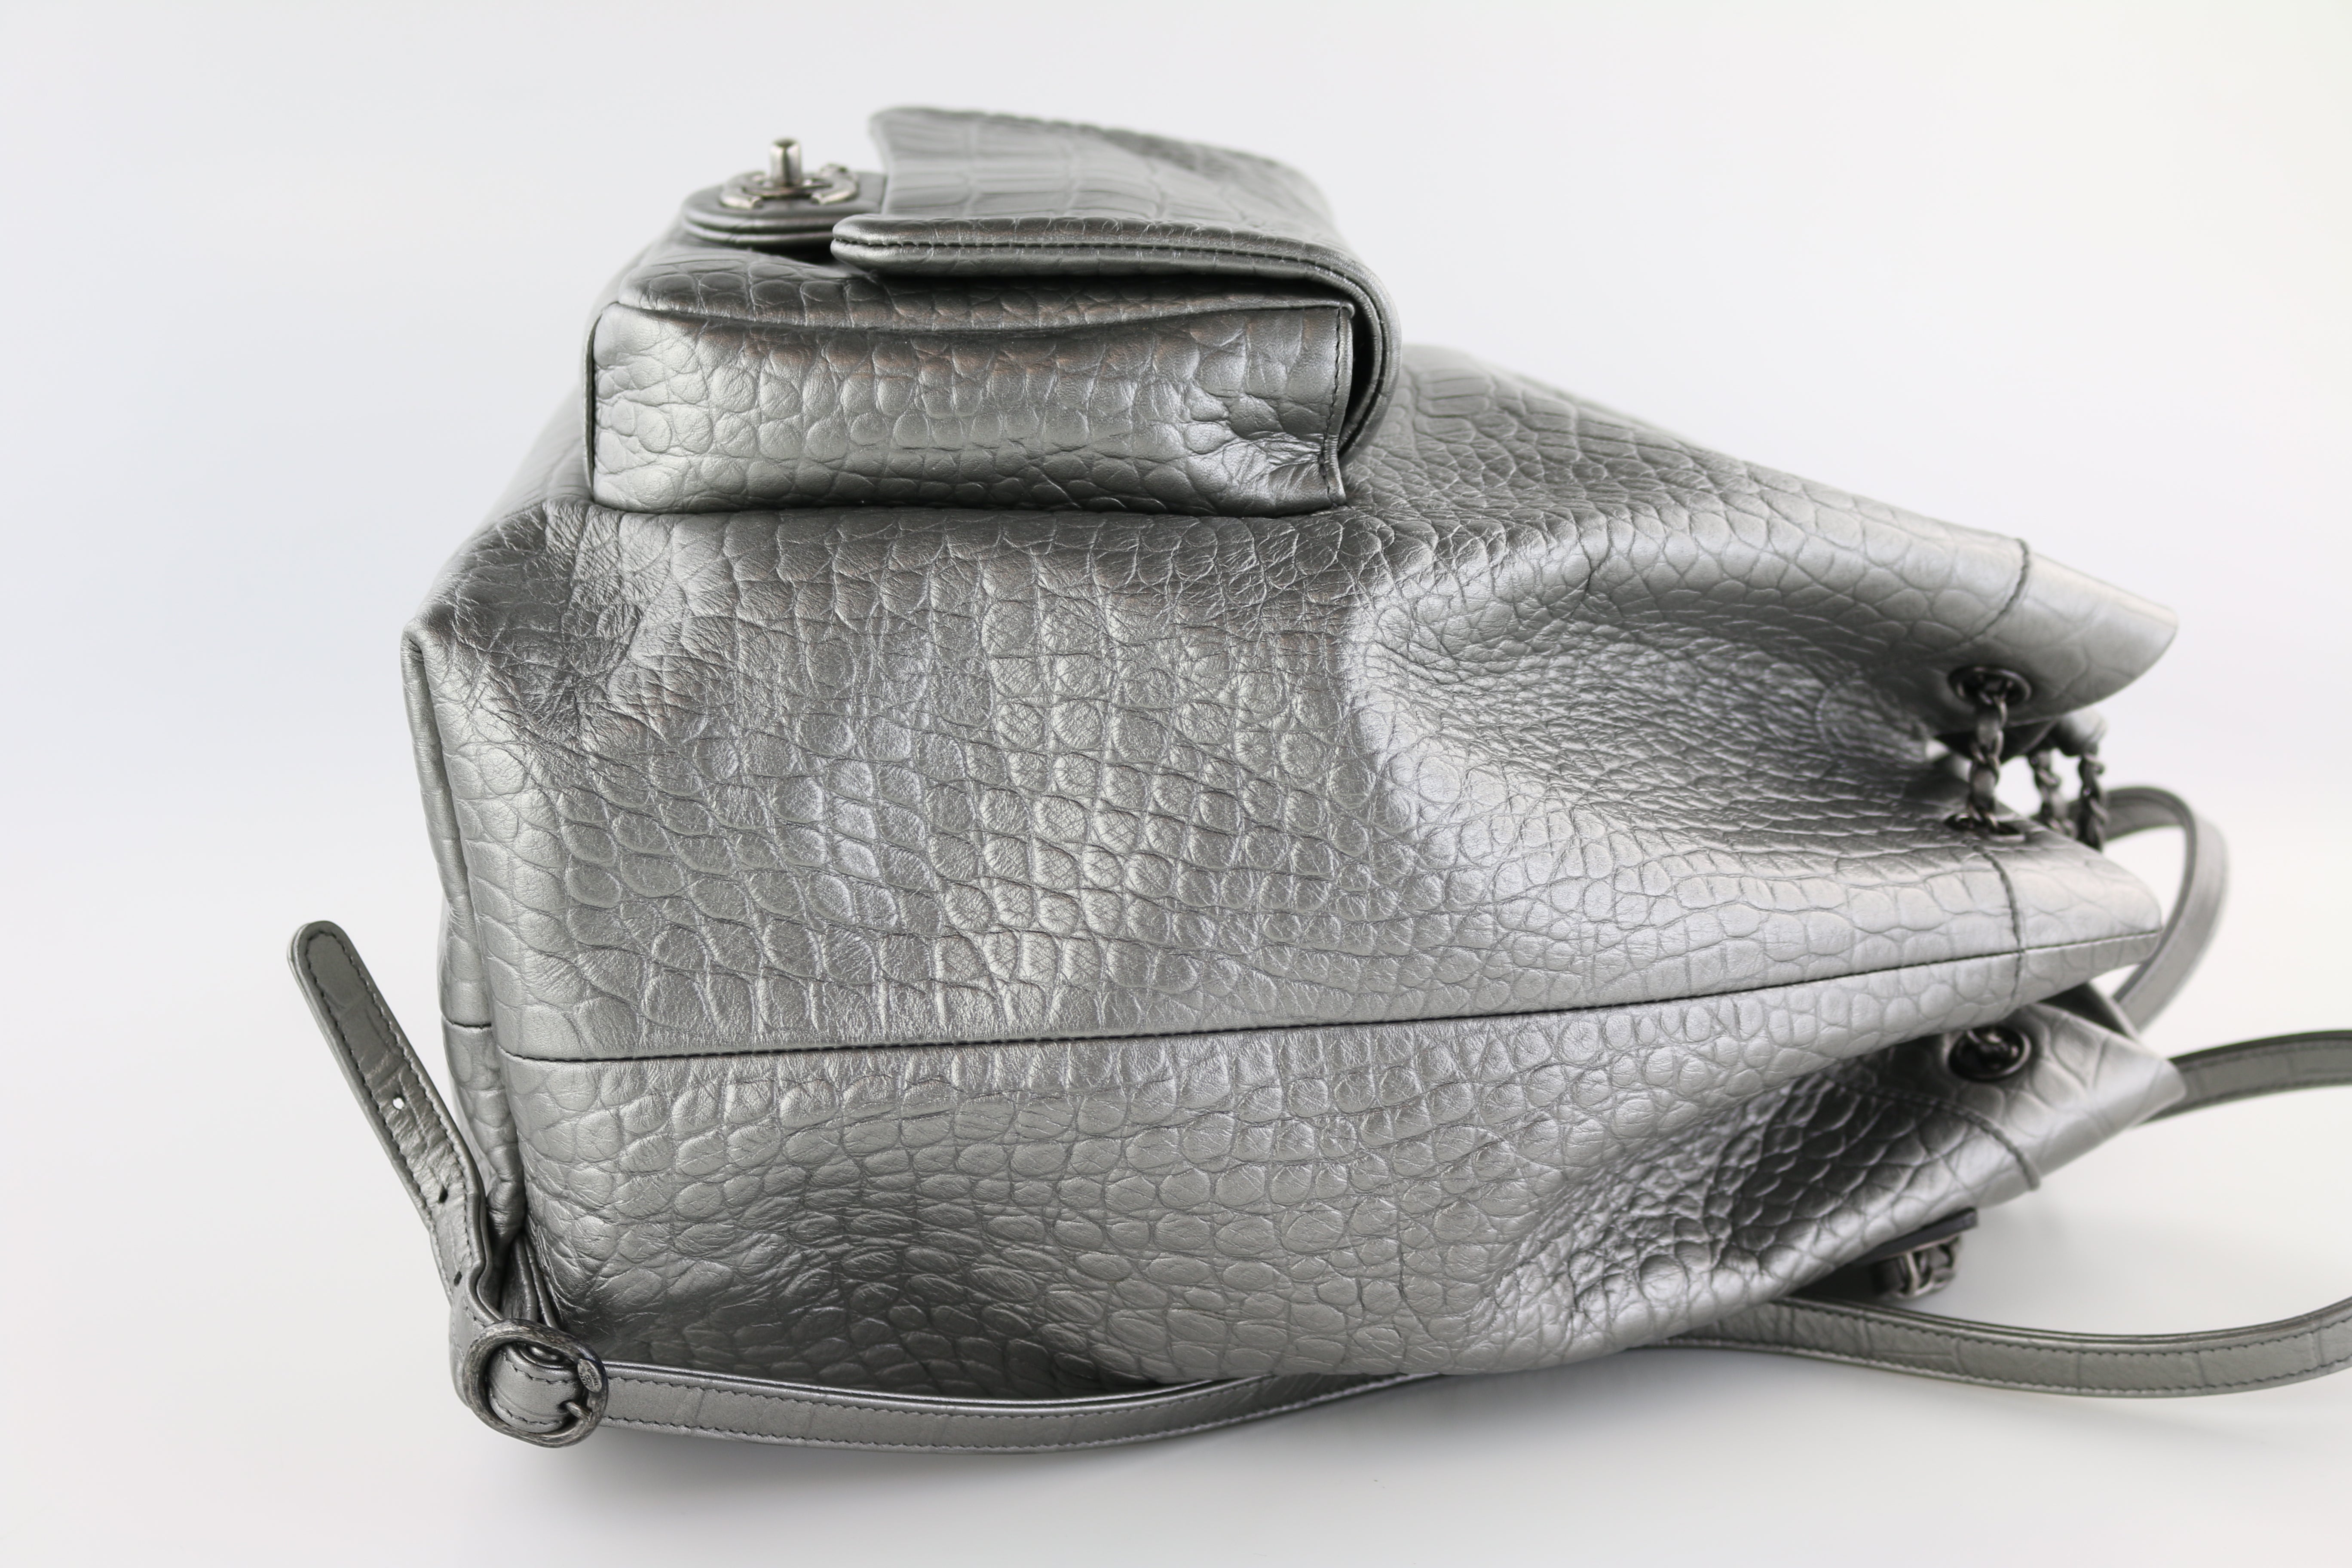 Million-dollar collection of Himalaya croc bags owned by Marian